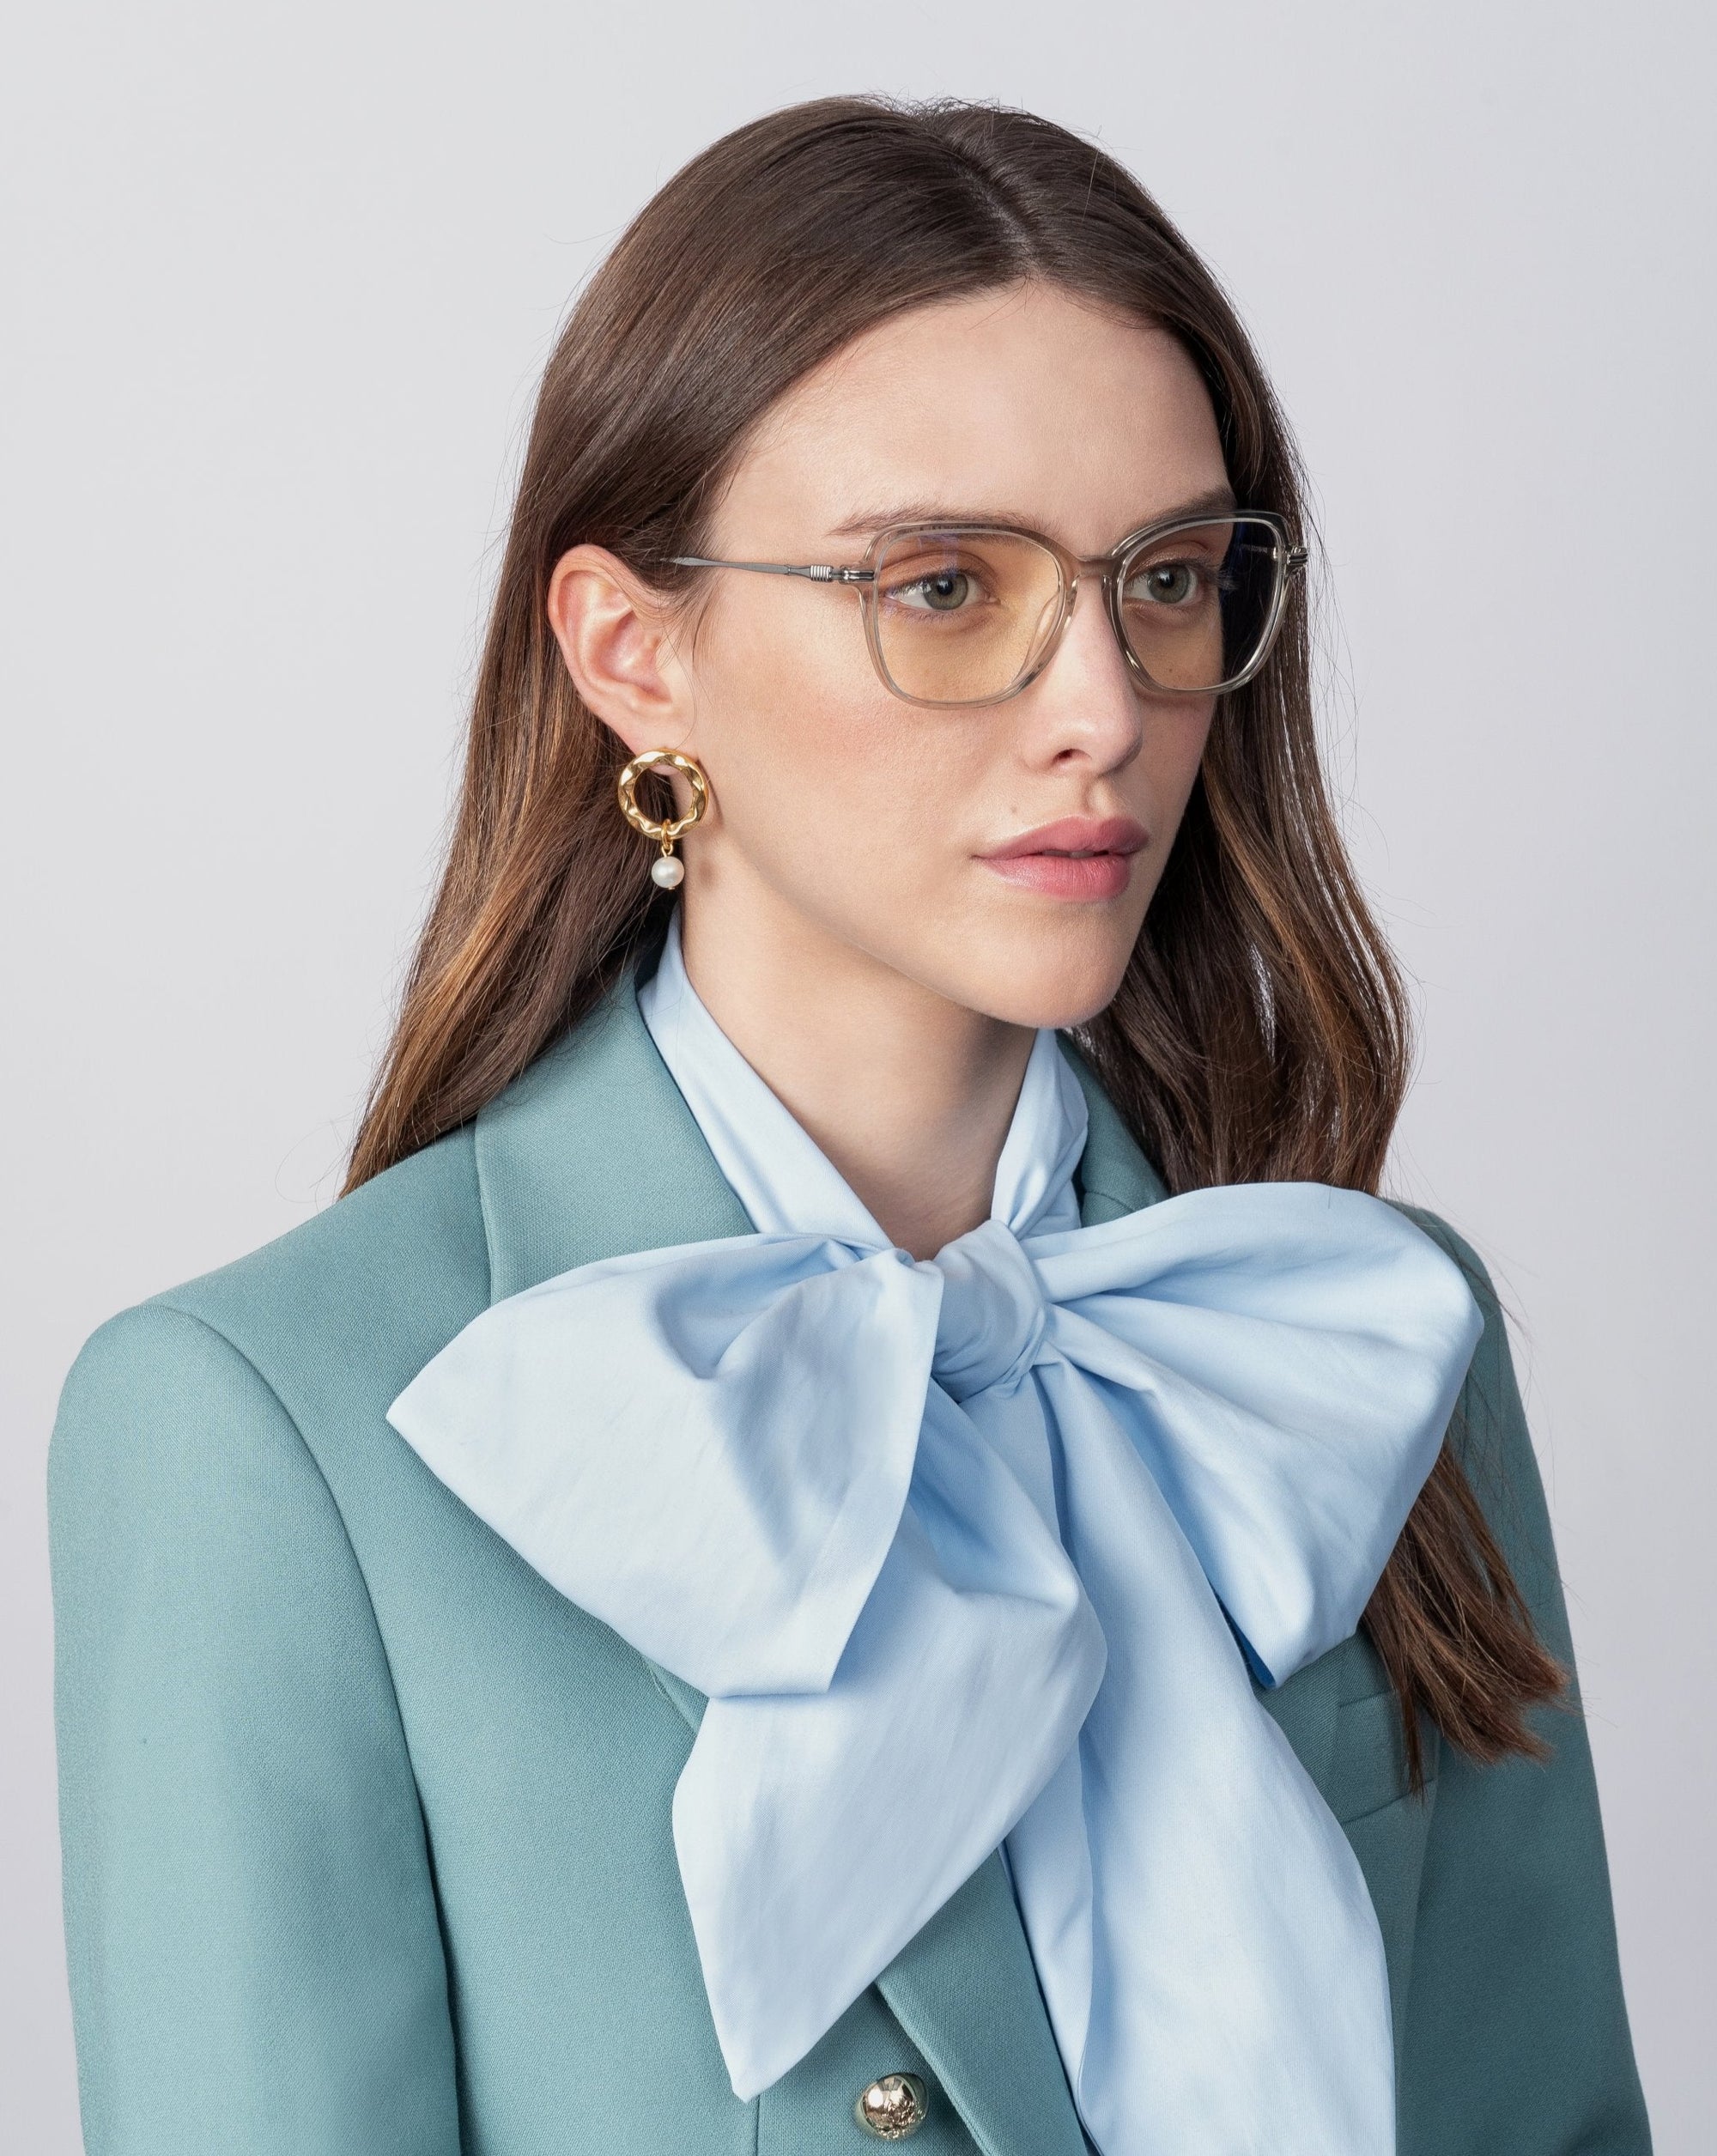 A person with long brown hair and glasses with prescription lenses is shown from the shoulders up, wearing a green blazer and a large light blue bow tie. They have 18-karat gold-plated earrings by For Art's Sake® Sonnet and a neutral expression against a plain light background.